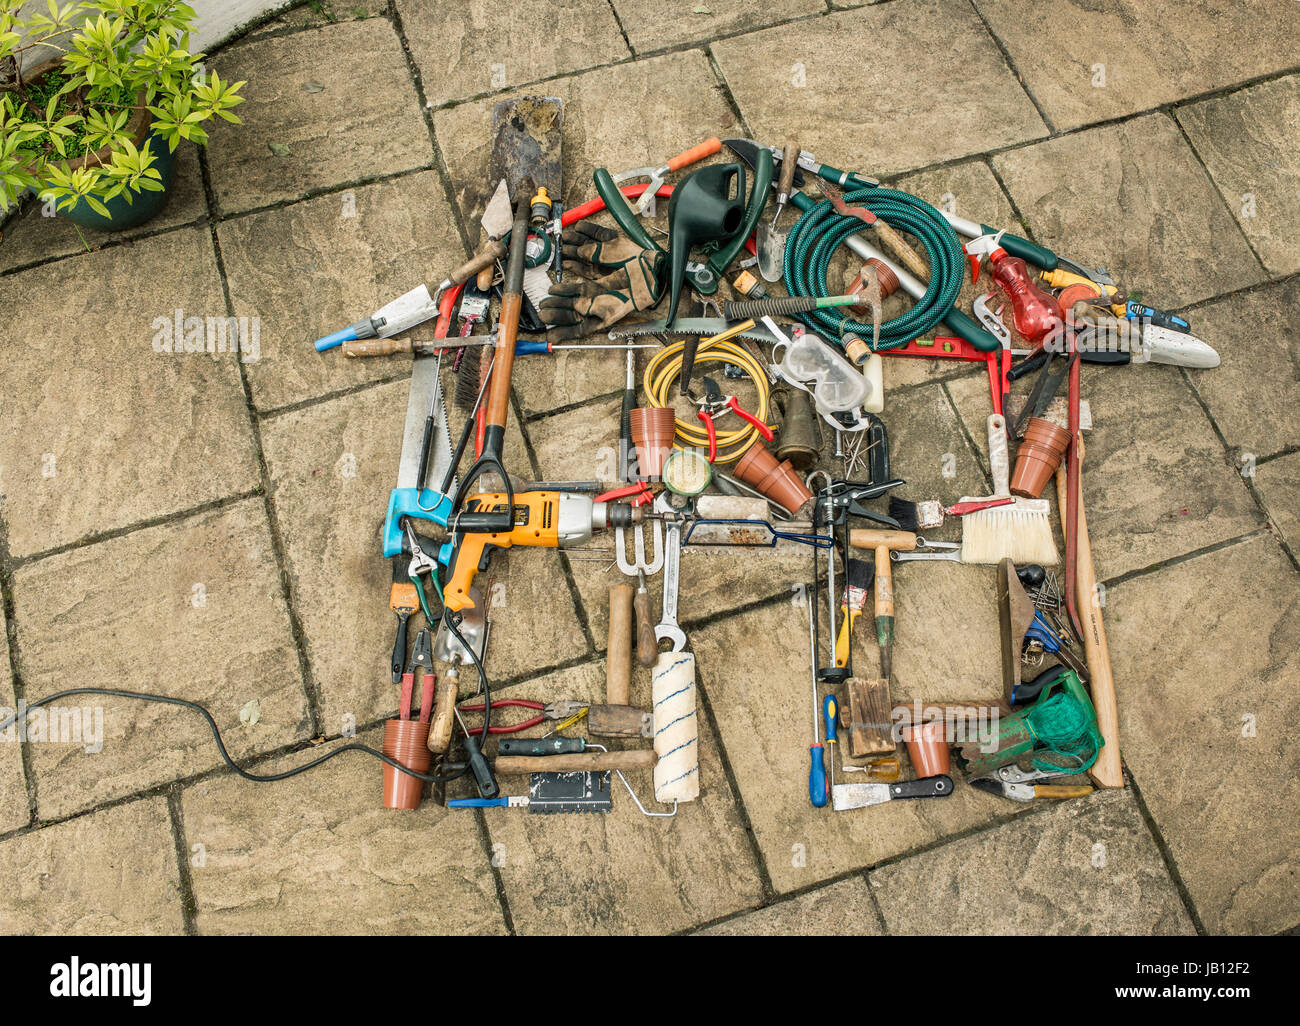 house symbol made from tools and gardening equipment Stock Photo